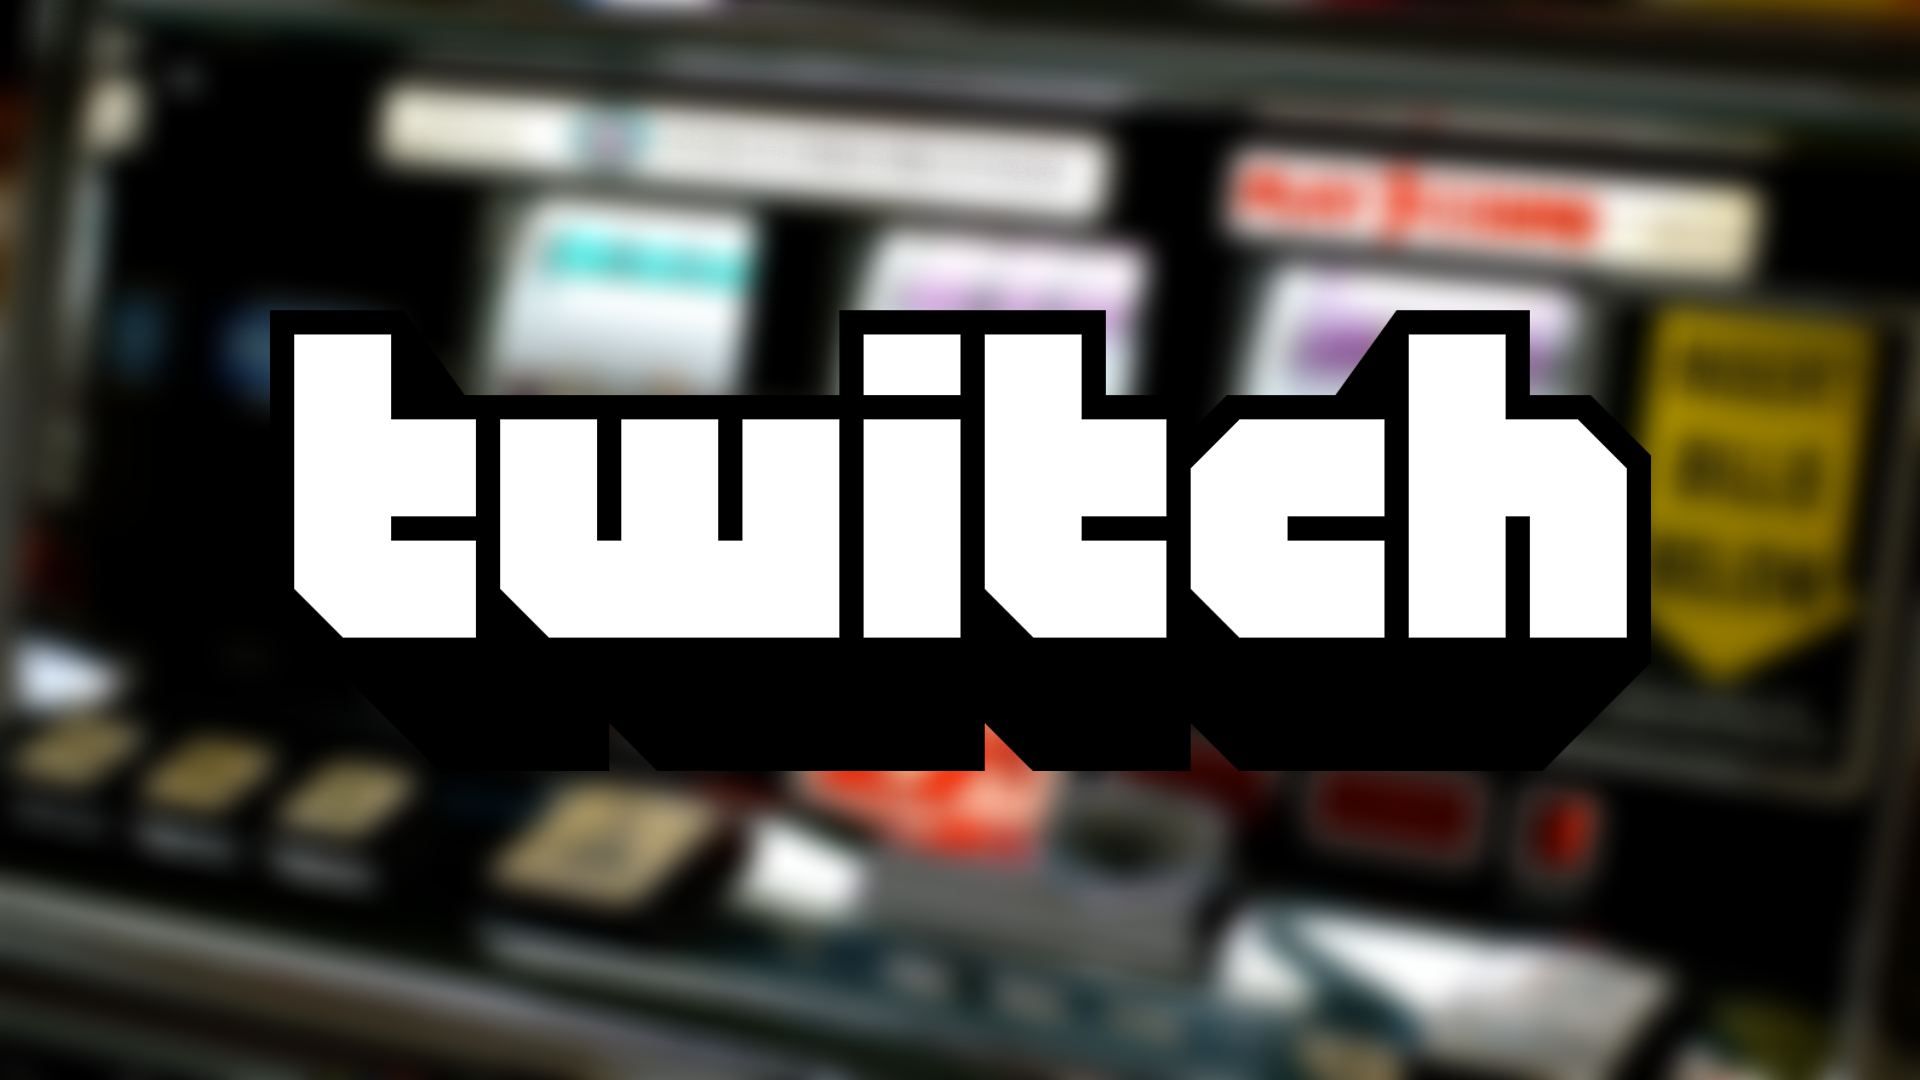 Today, we are going to cover Twitch bans gambling from the platform, which has been a long debated topic about the popular streaming platform.